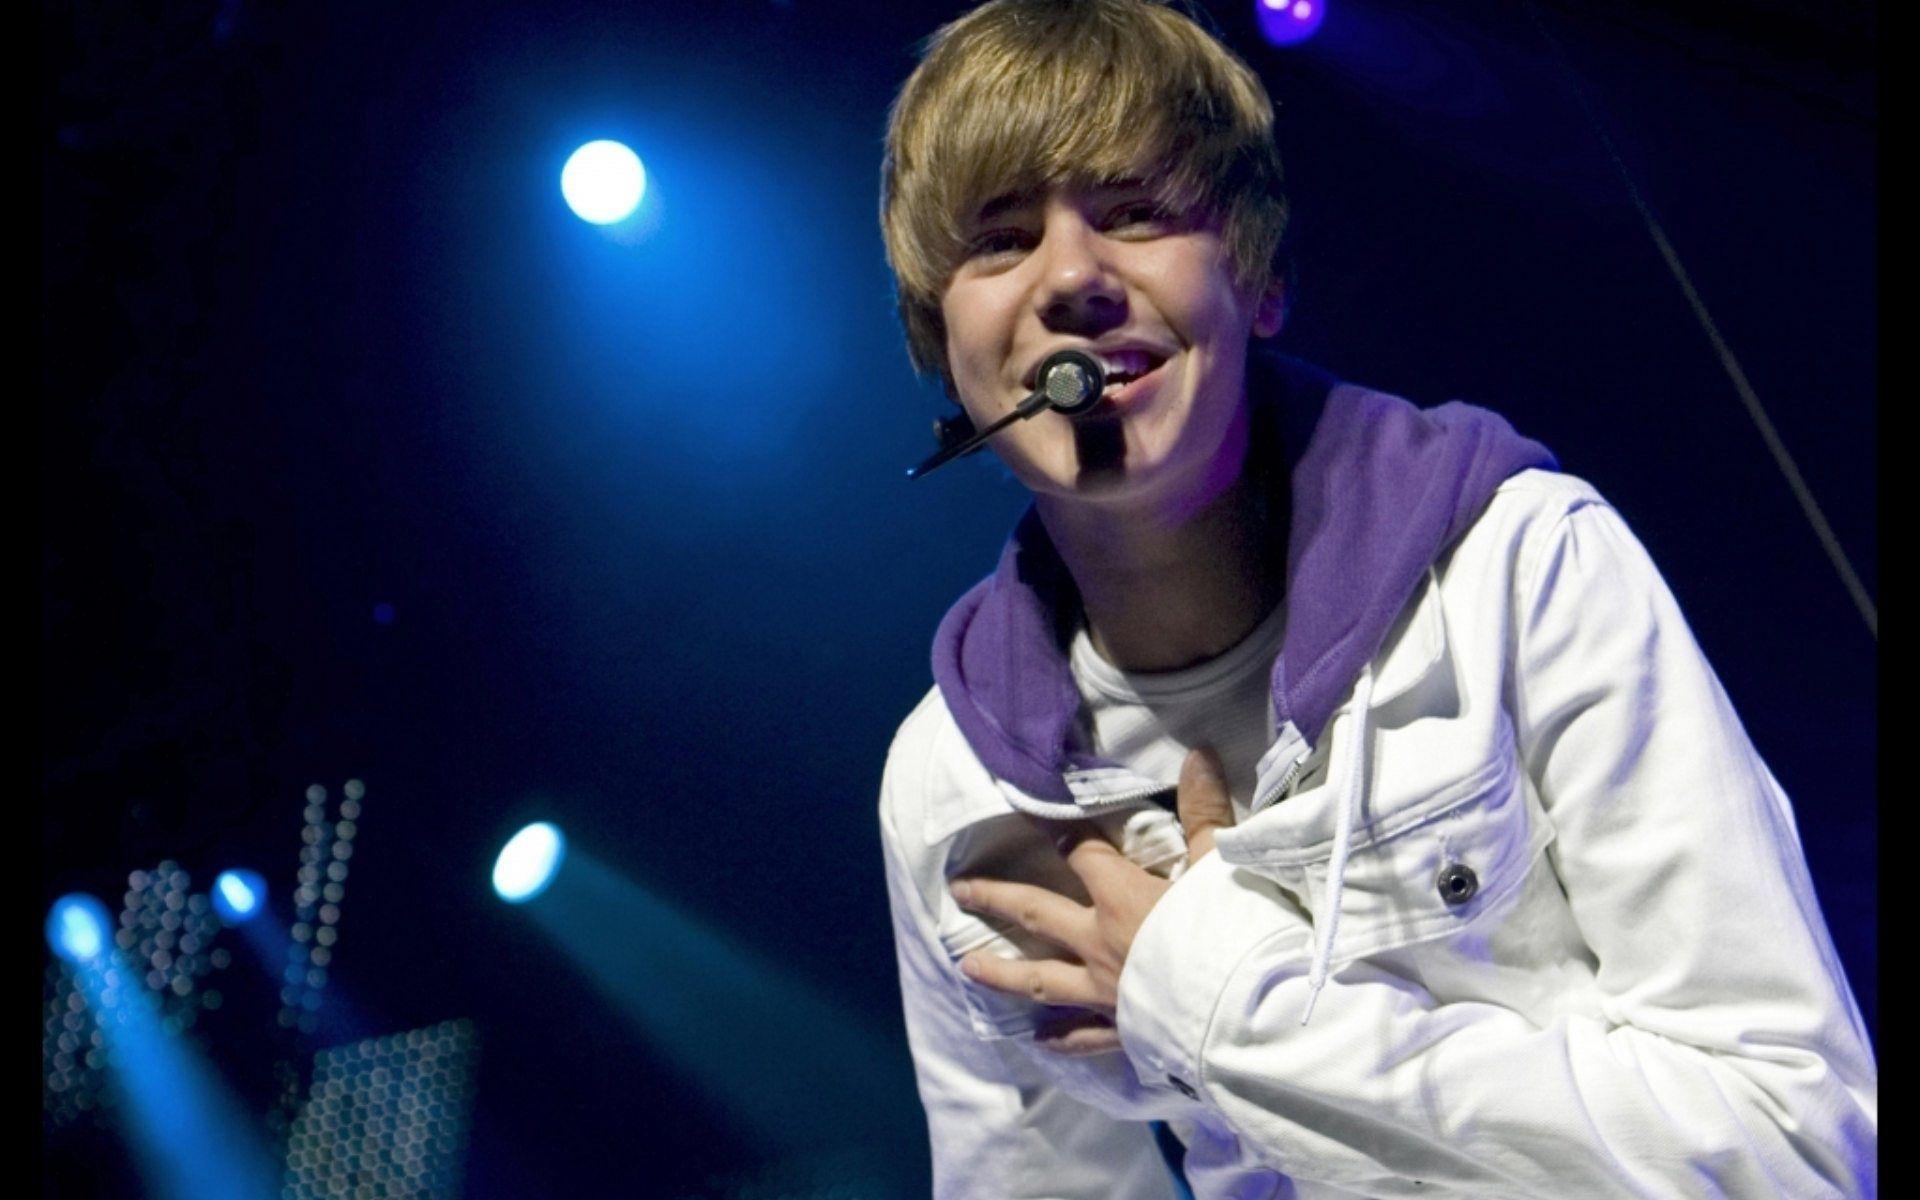 Justin Bieber One Less Lonely wallpaper